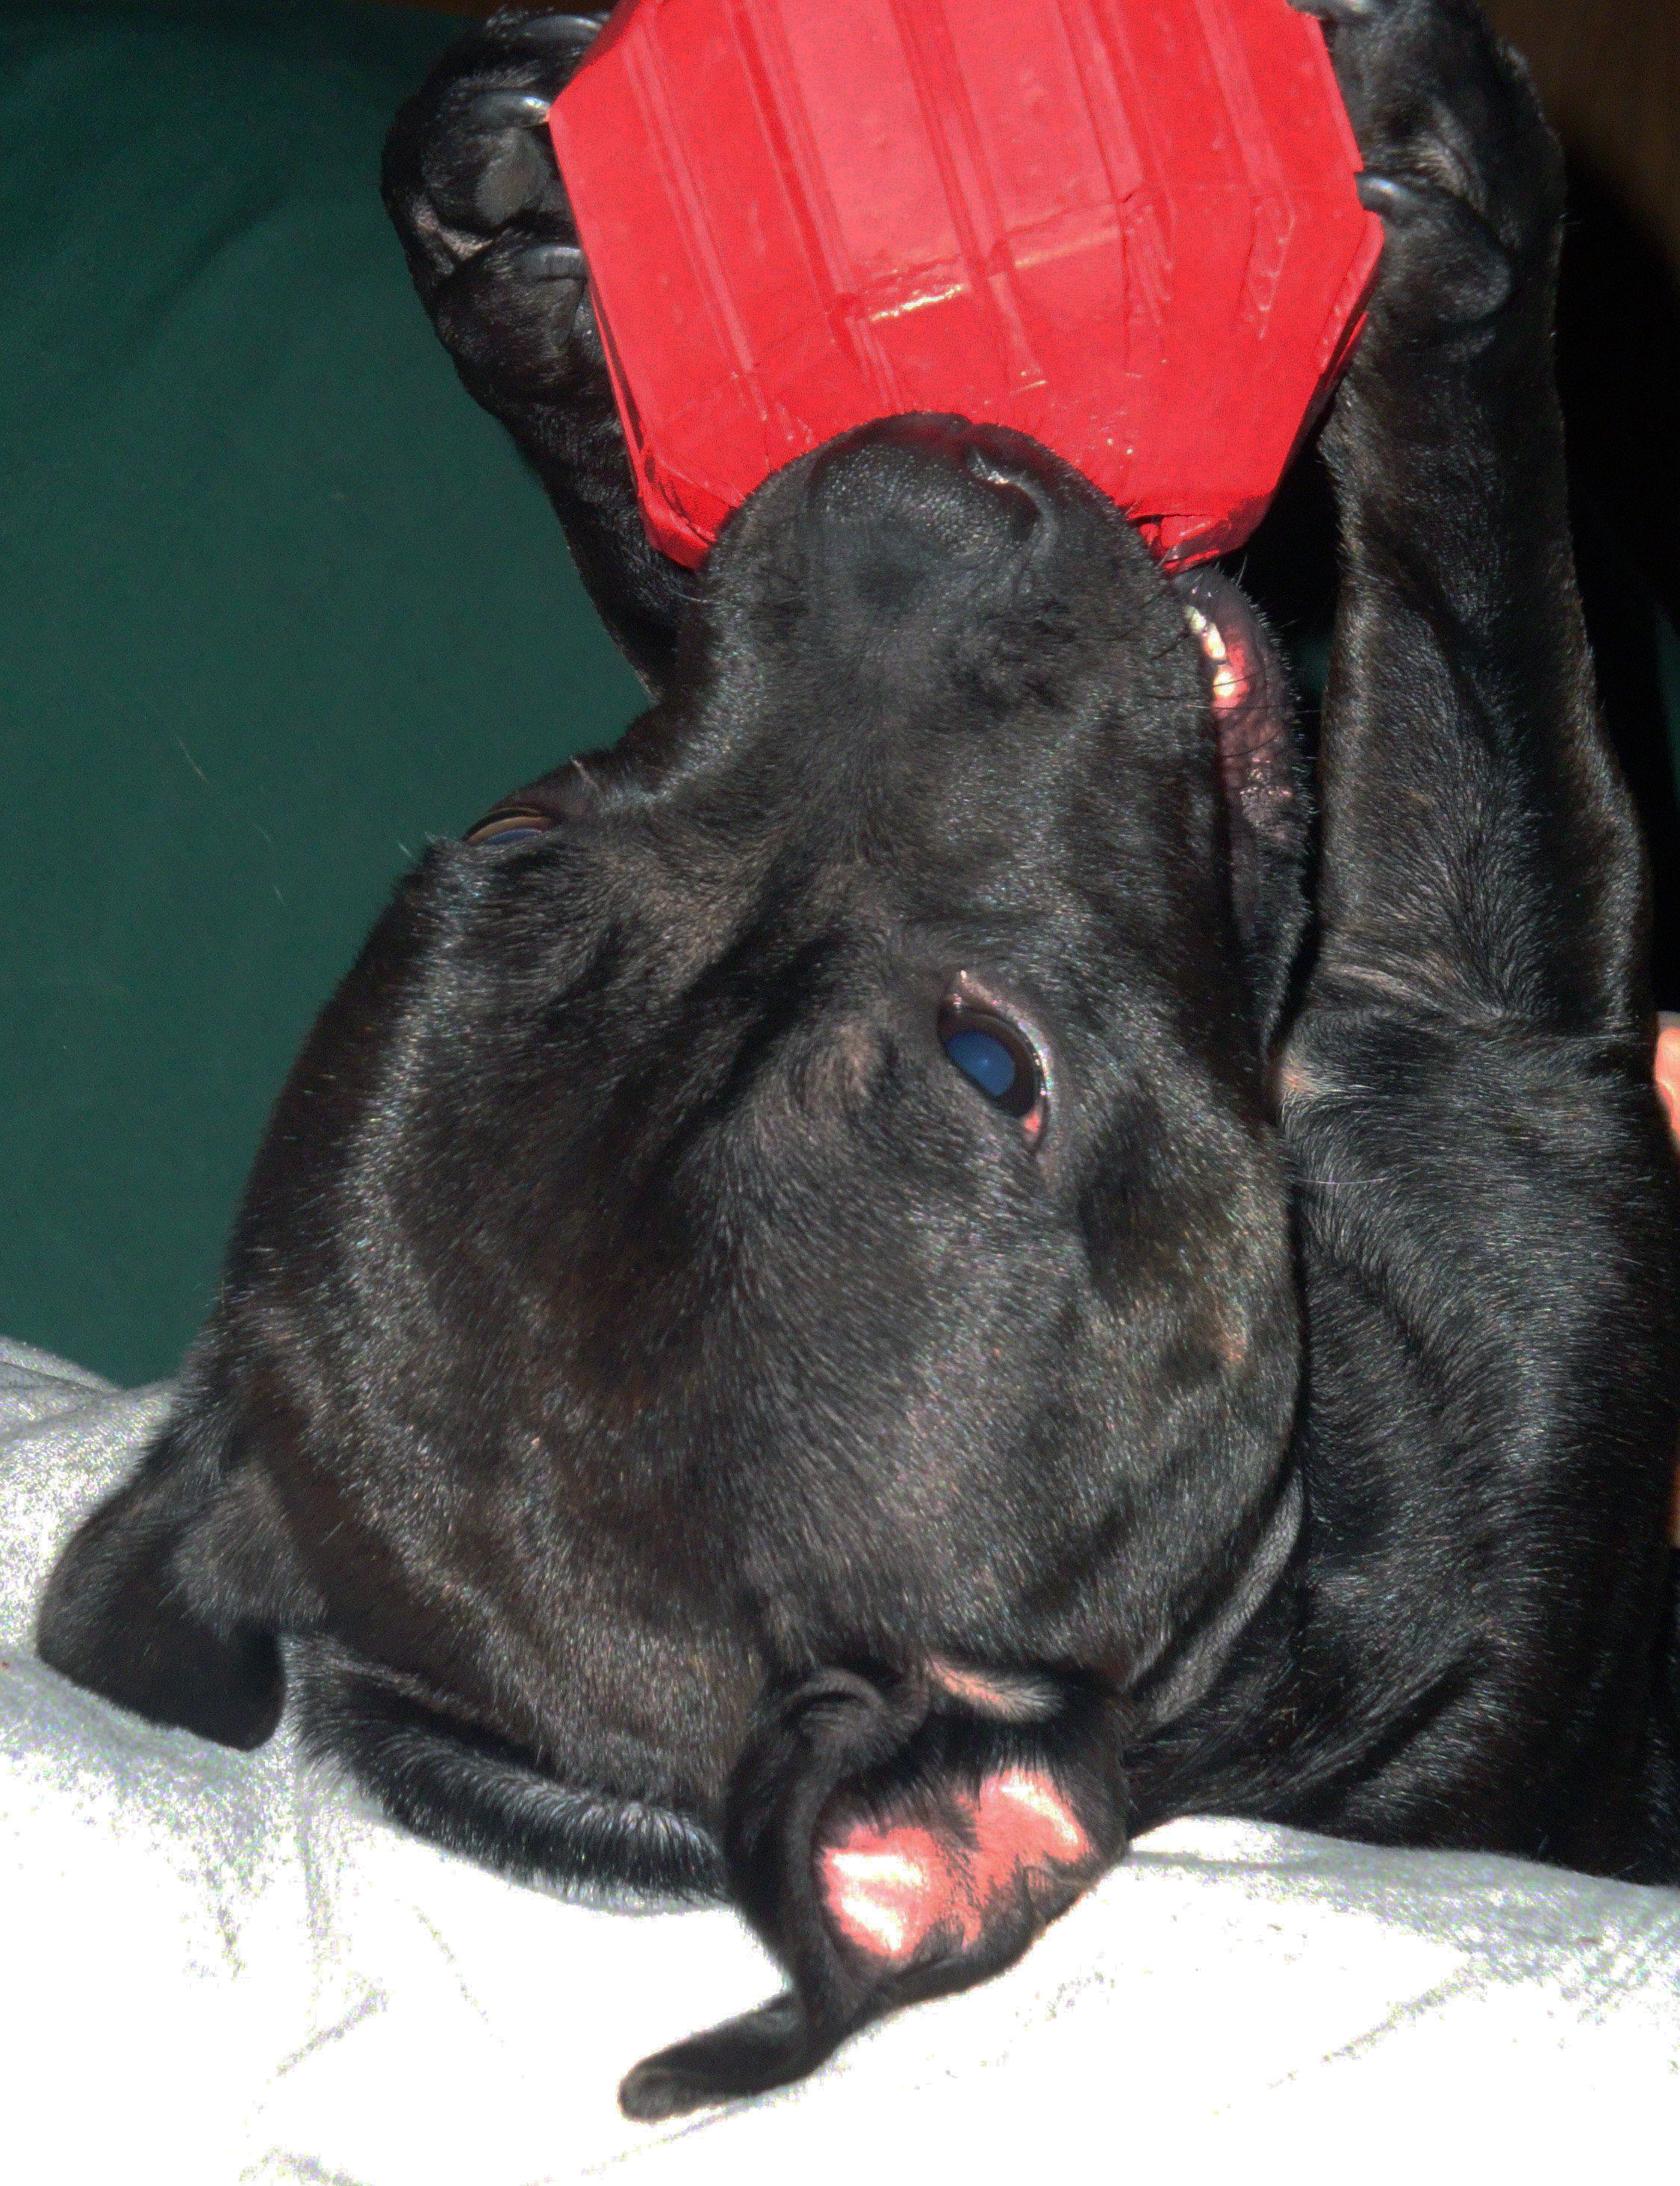 Elly trying to get a treat out of a kong toy.